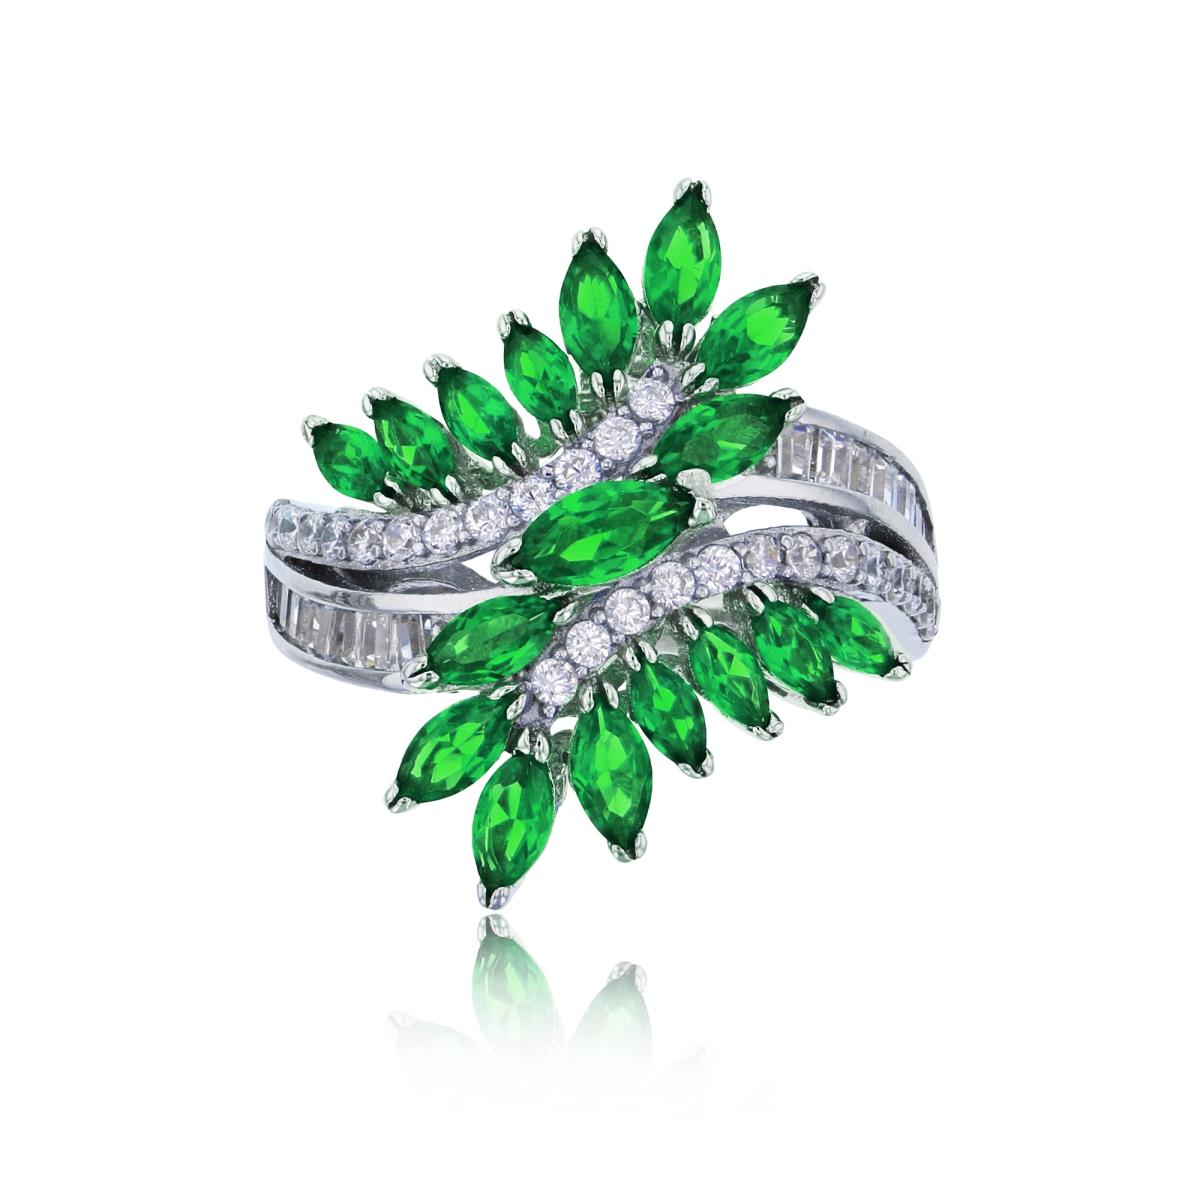 Sterling Silver Rhodium Pave White Rd & Emerald Marquise Cut CZ Leaf Branch Fashion Ring